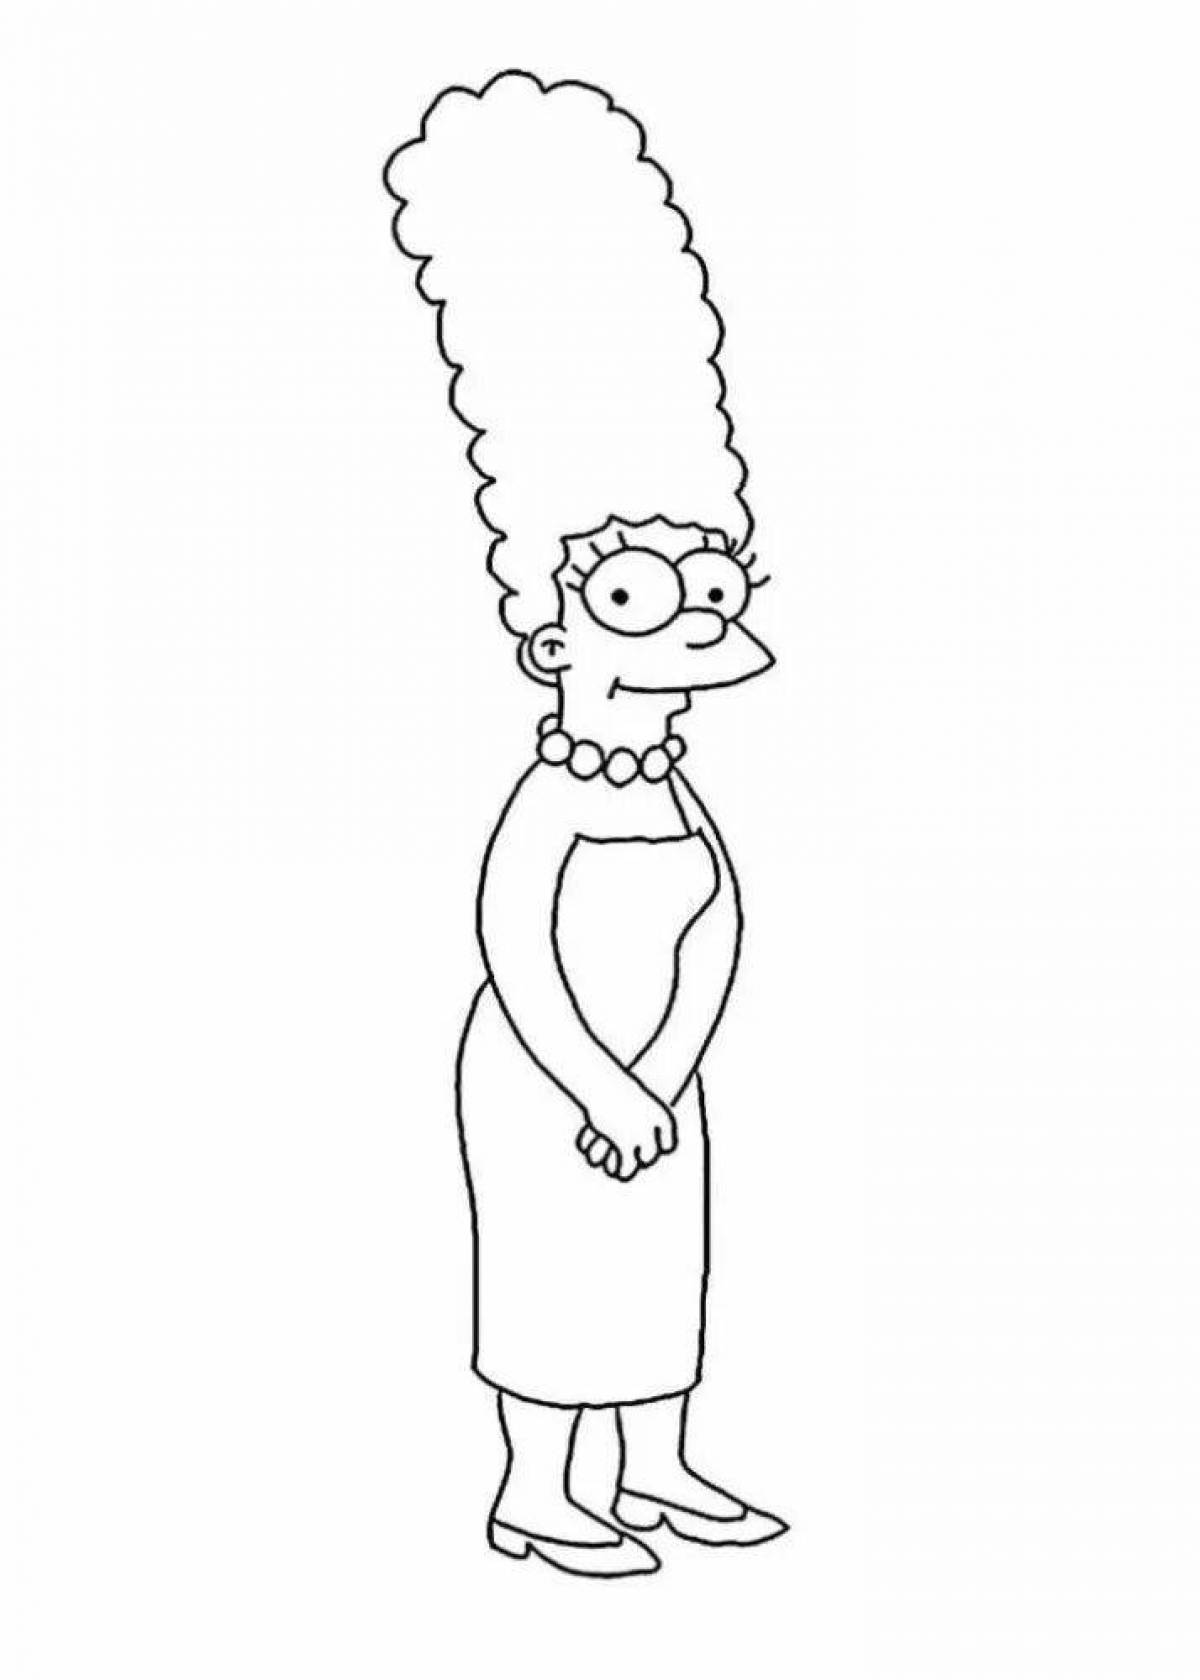 Marge simpson fun coloring book